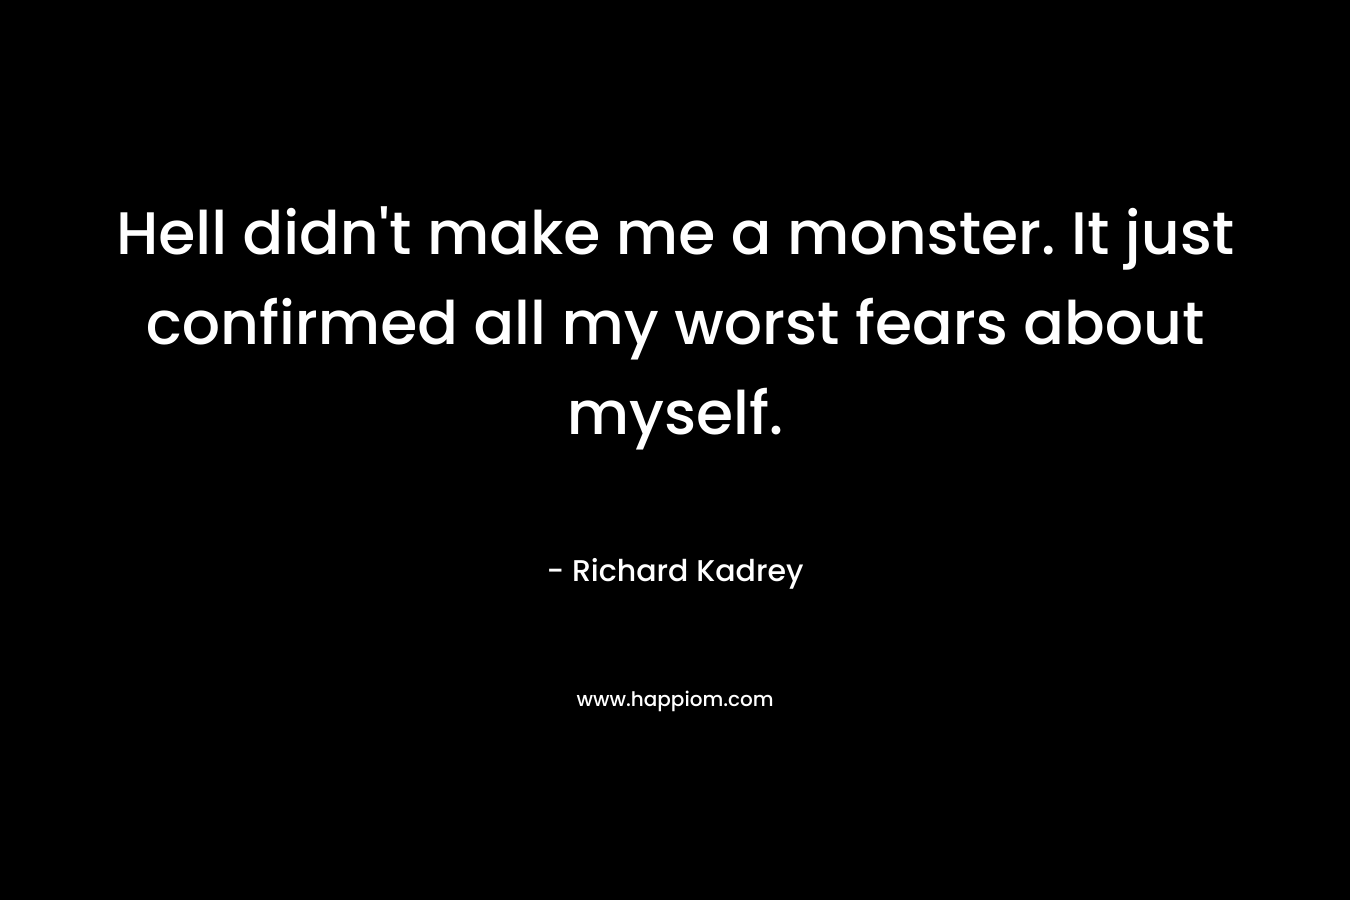 Hell didn’t make me a monster. It just confirmed all my worst fears about myself. – Richard Kadrey